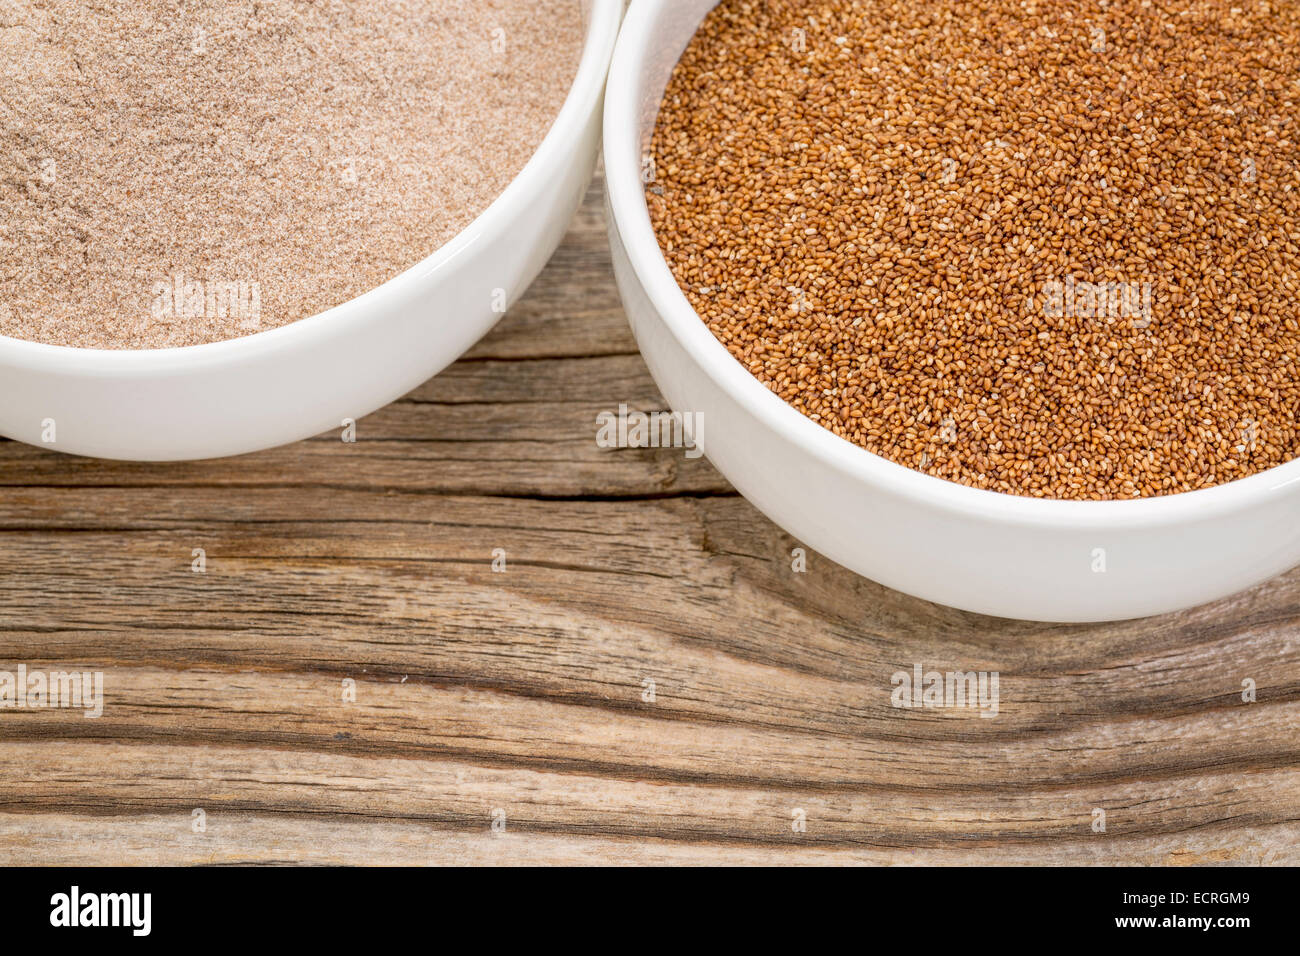 teff grain and flour in small ceramic bowls against grained wood background Stock Photo